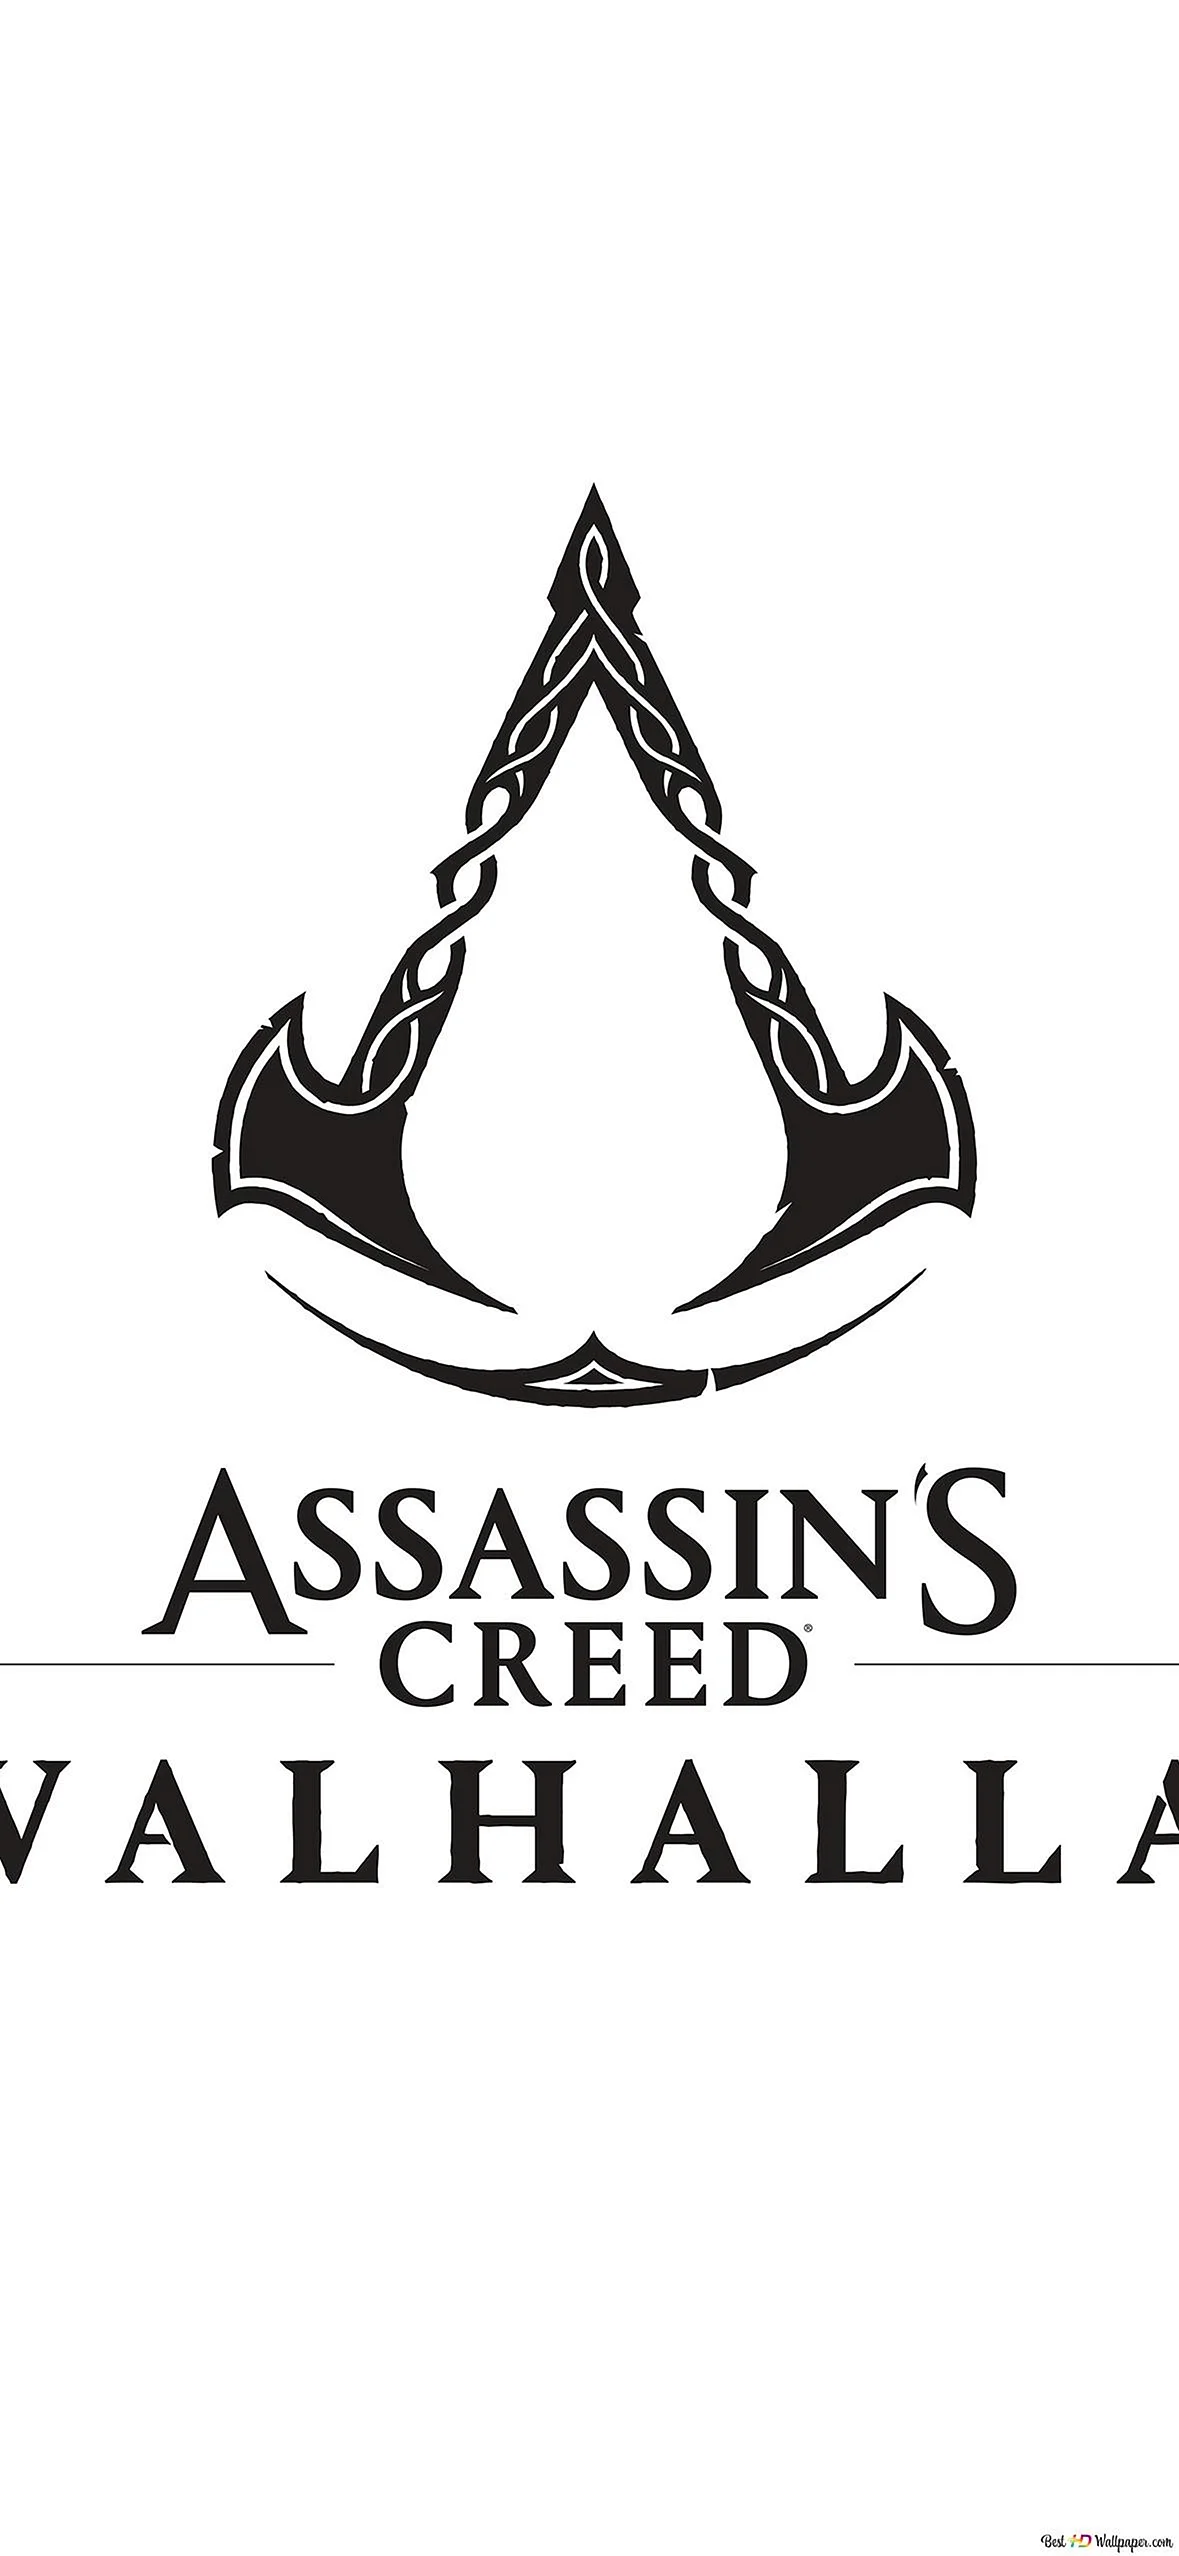 Assassins Creed Valhalla Wallpaper for iPhone 14 Pro